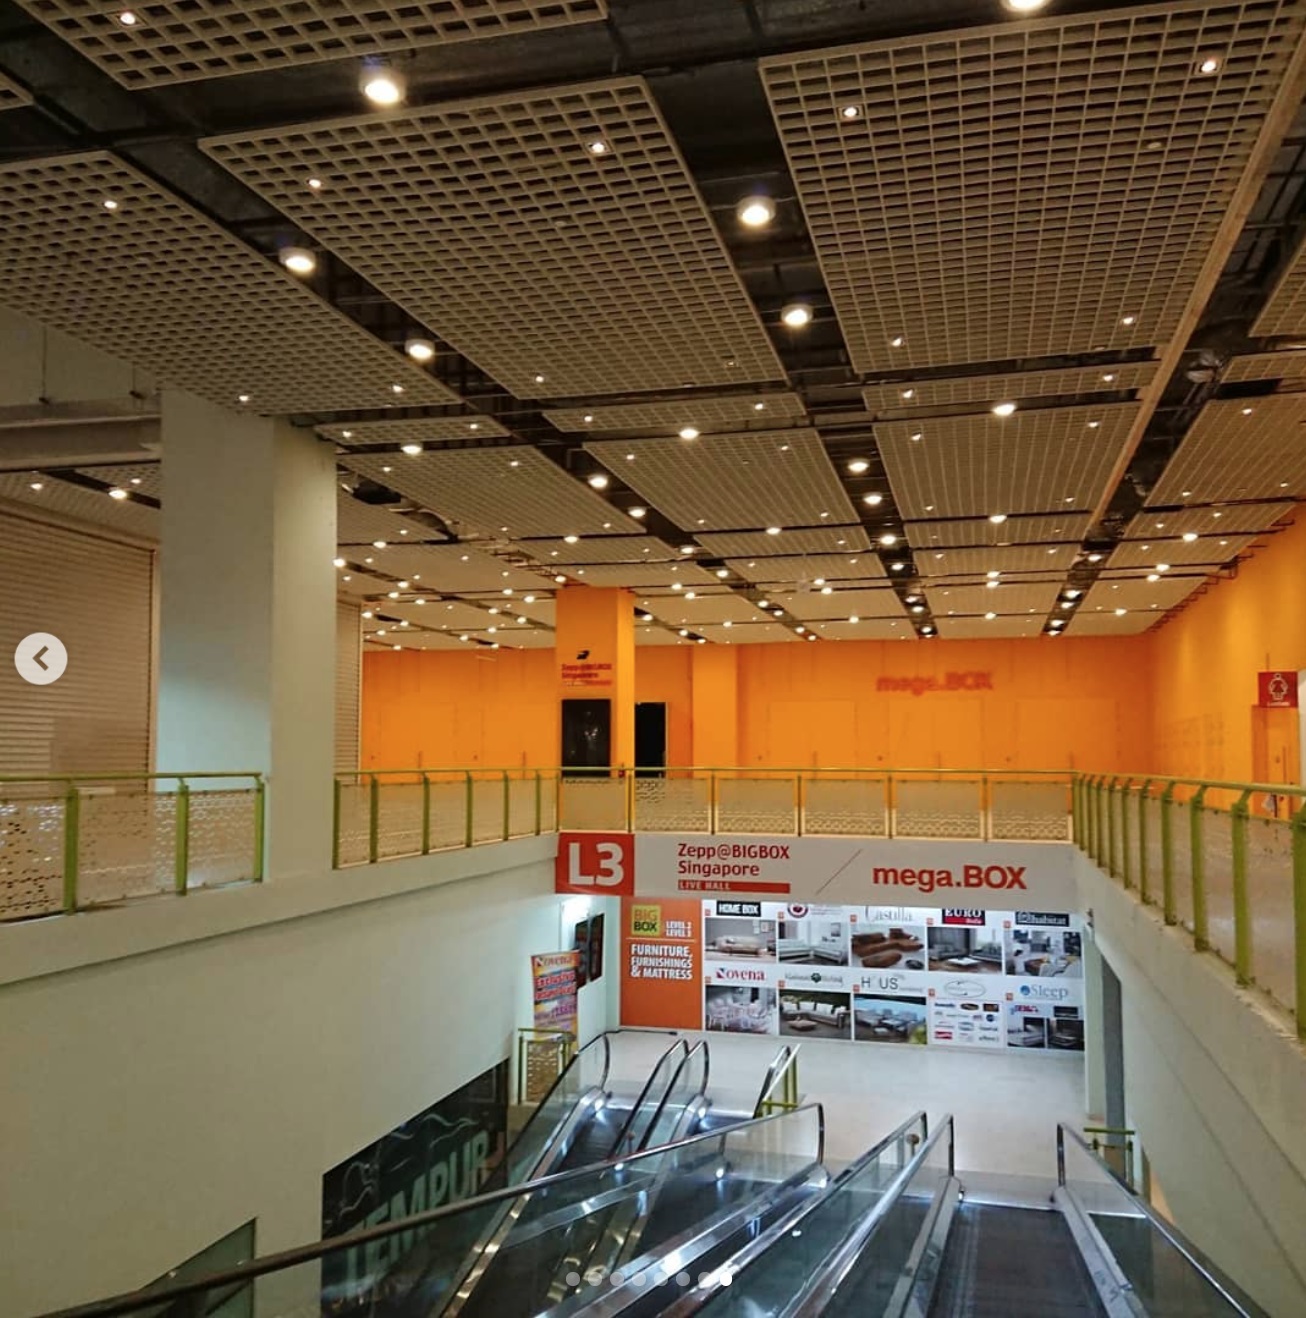 Big Box in Jurong East becomes Singapore's first mall with no crowd